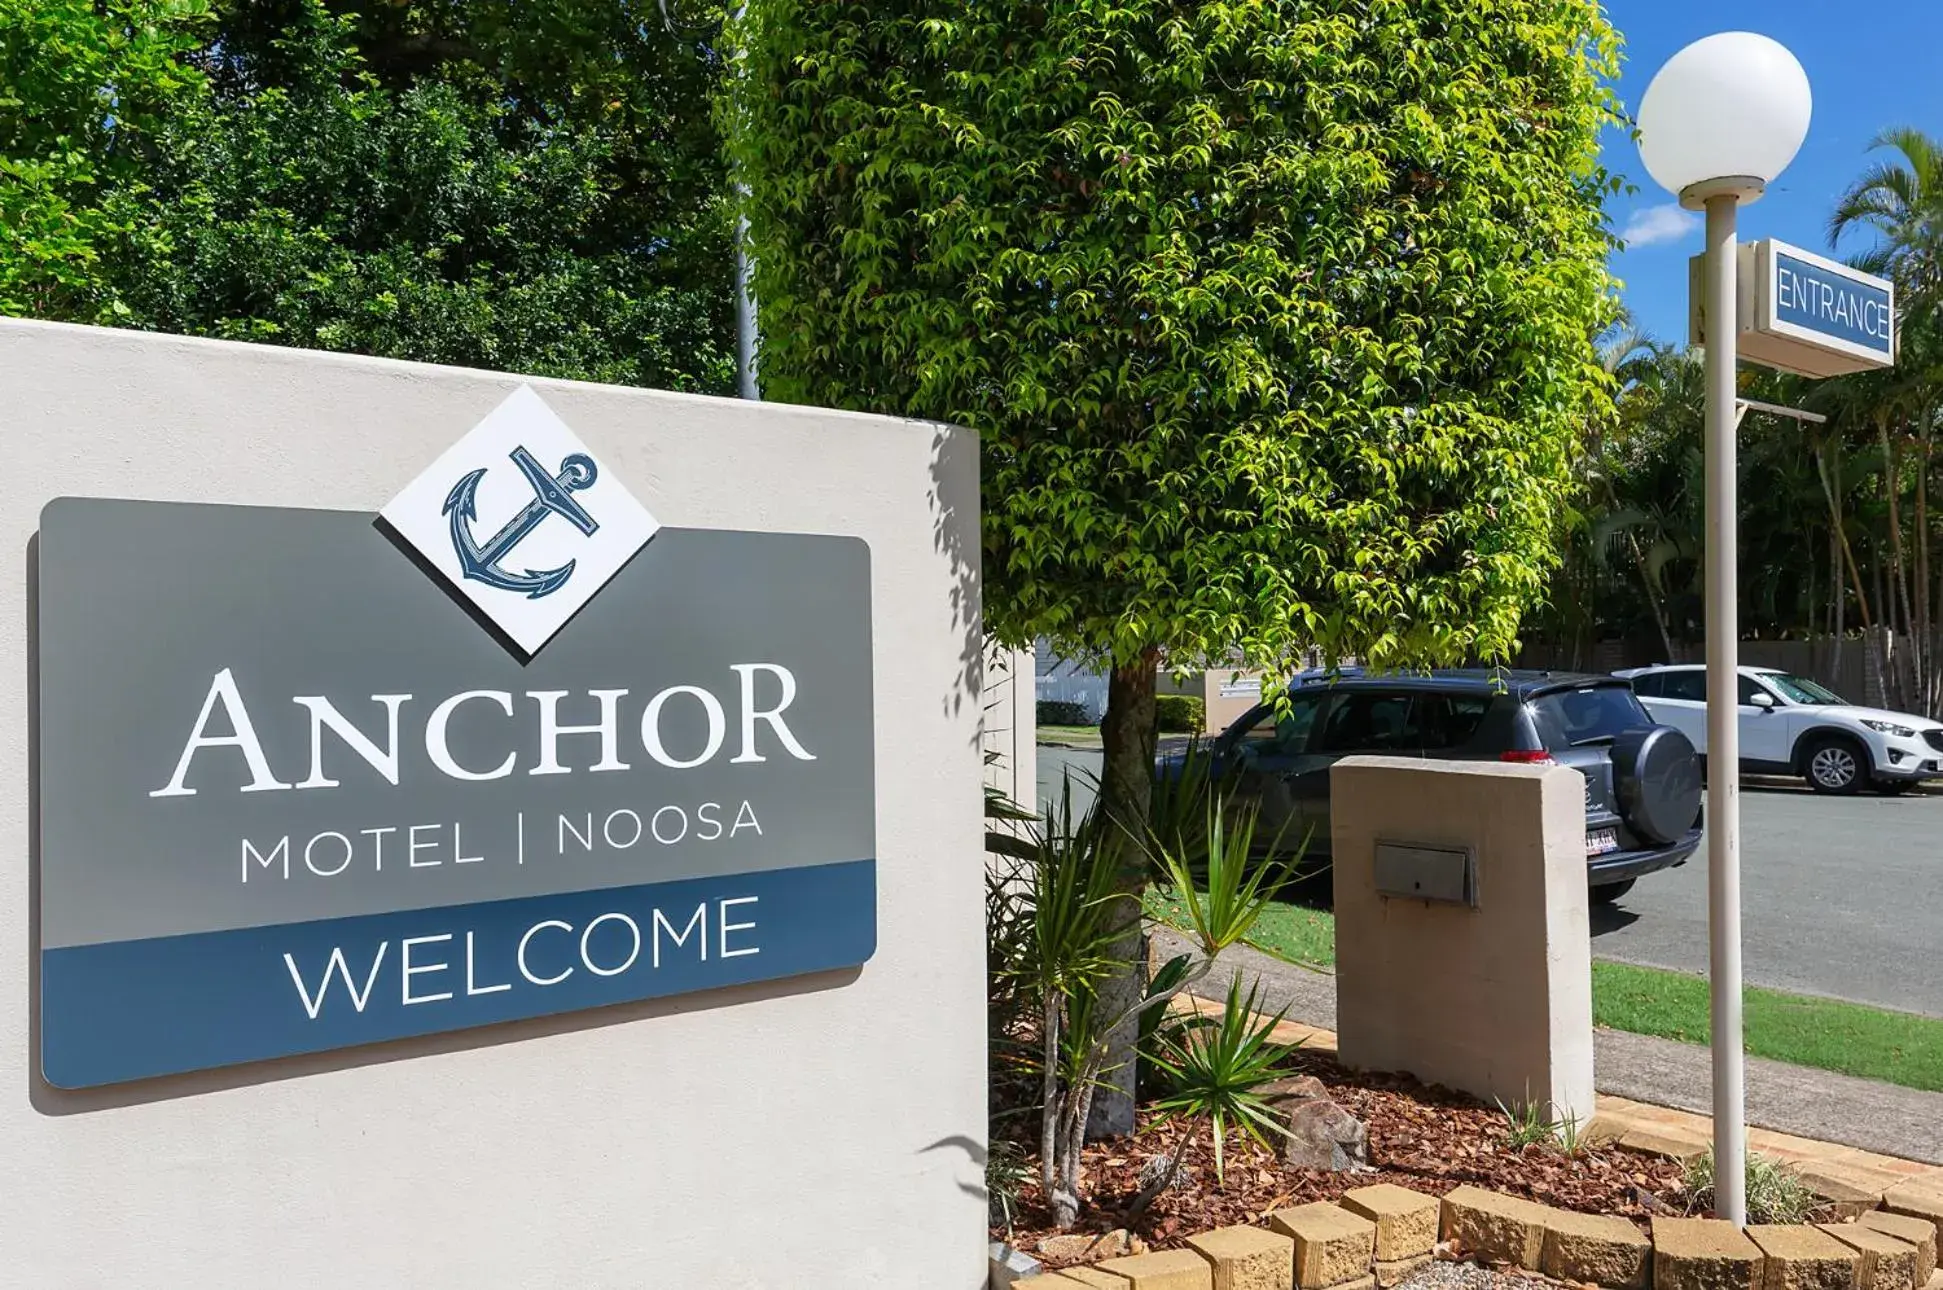 Property logo or sign in Anchor Motel Noosa